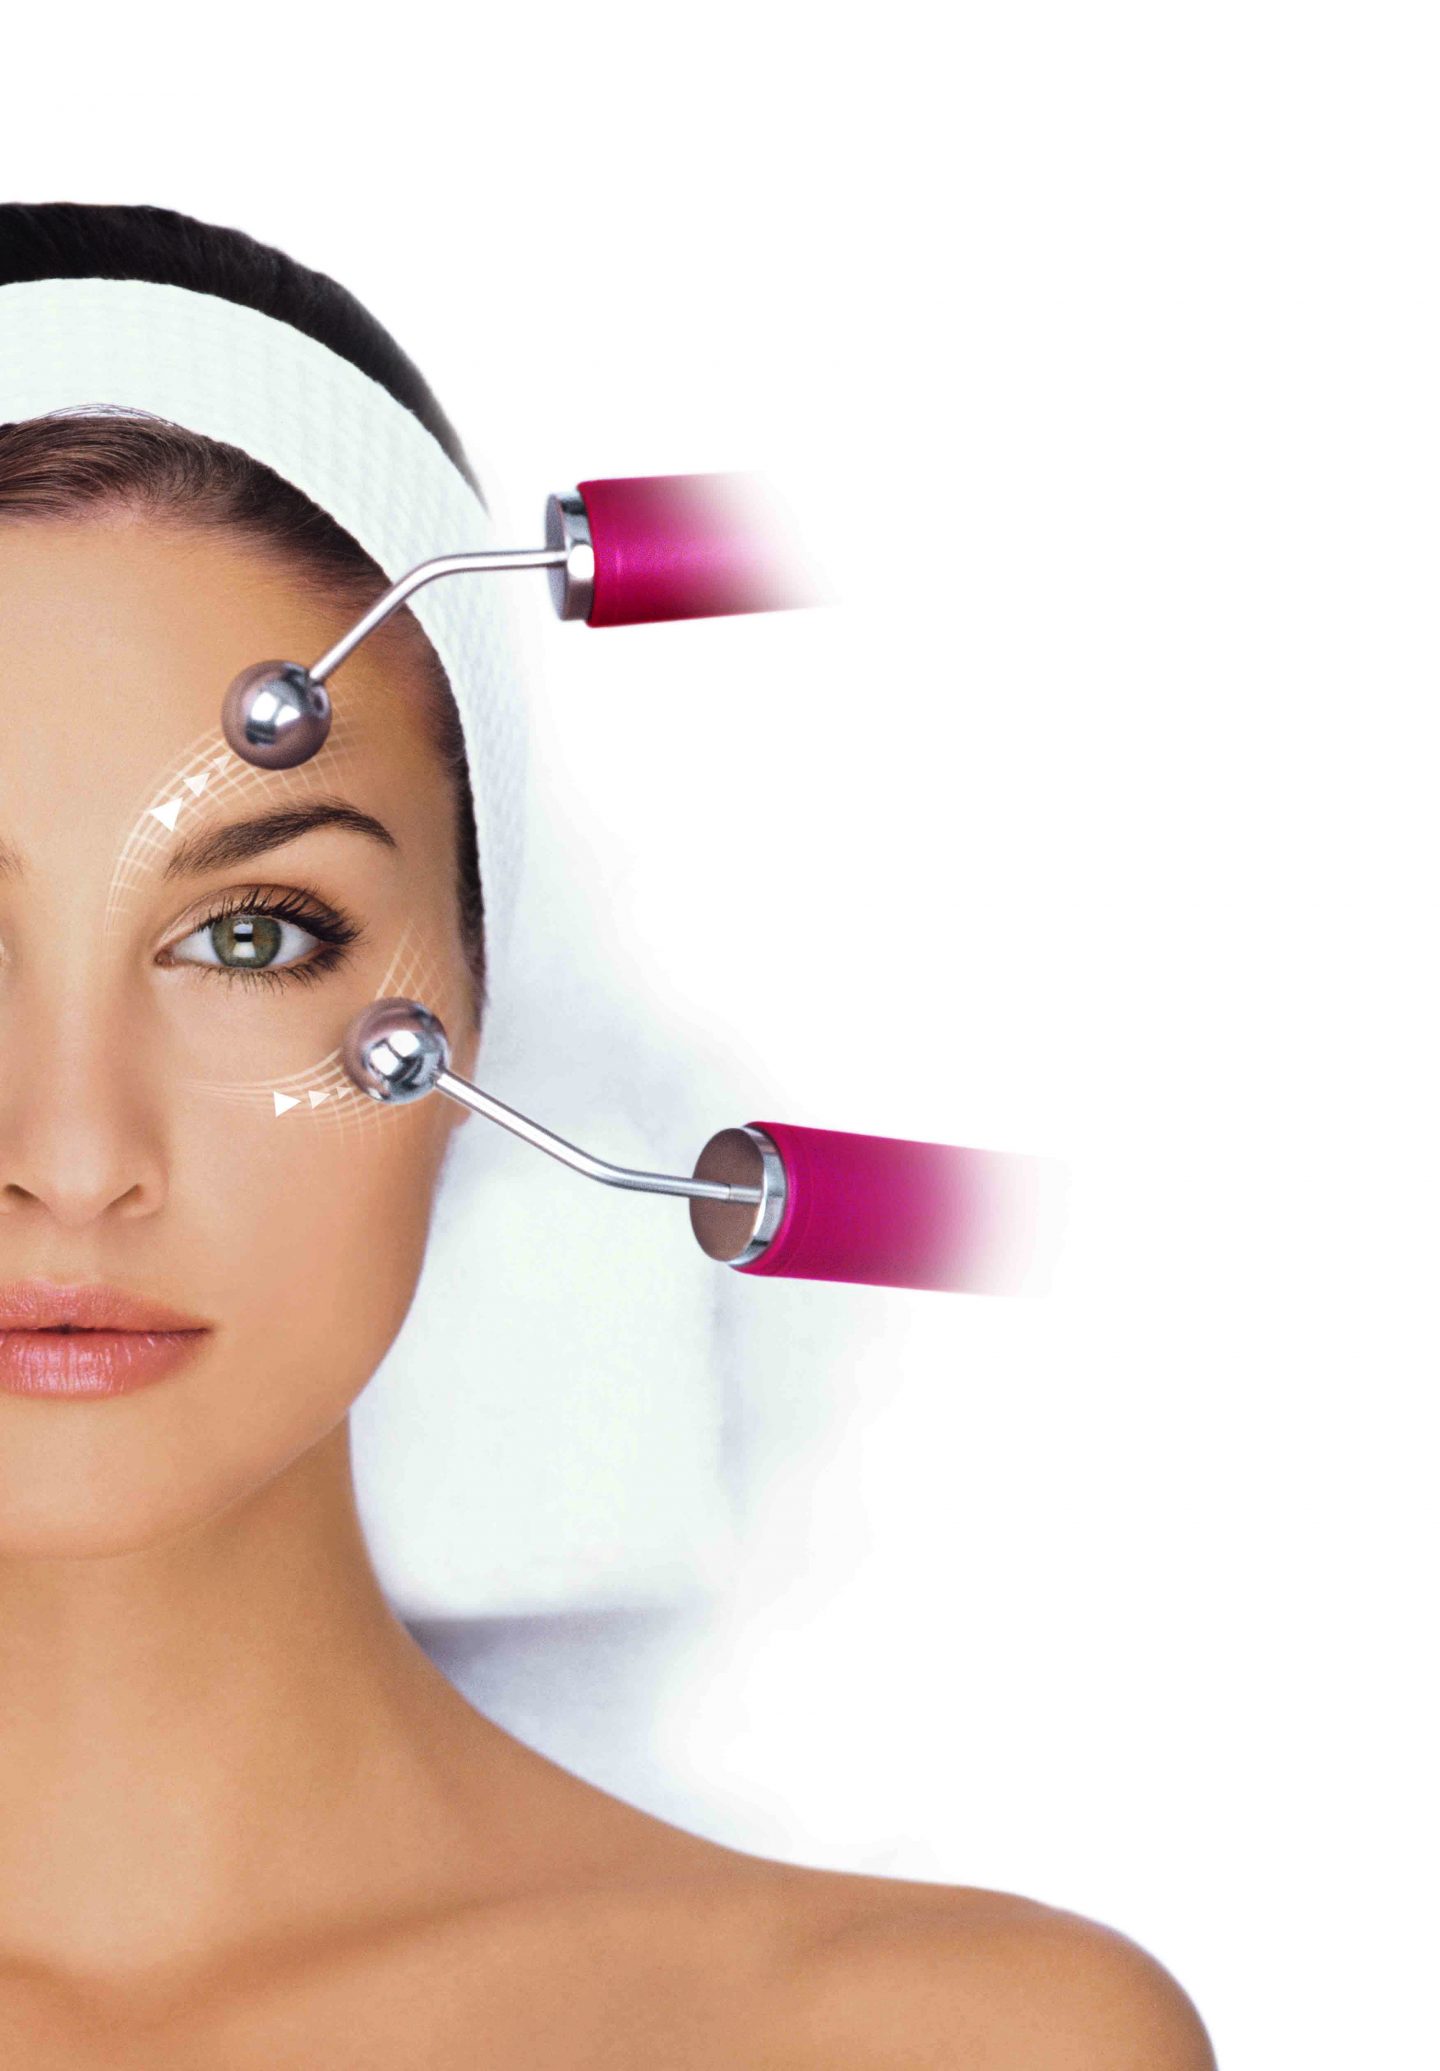 Free this month – Guinot Eye Lift Treatment